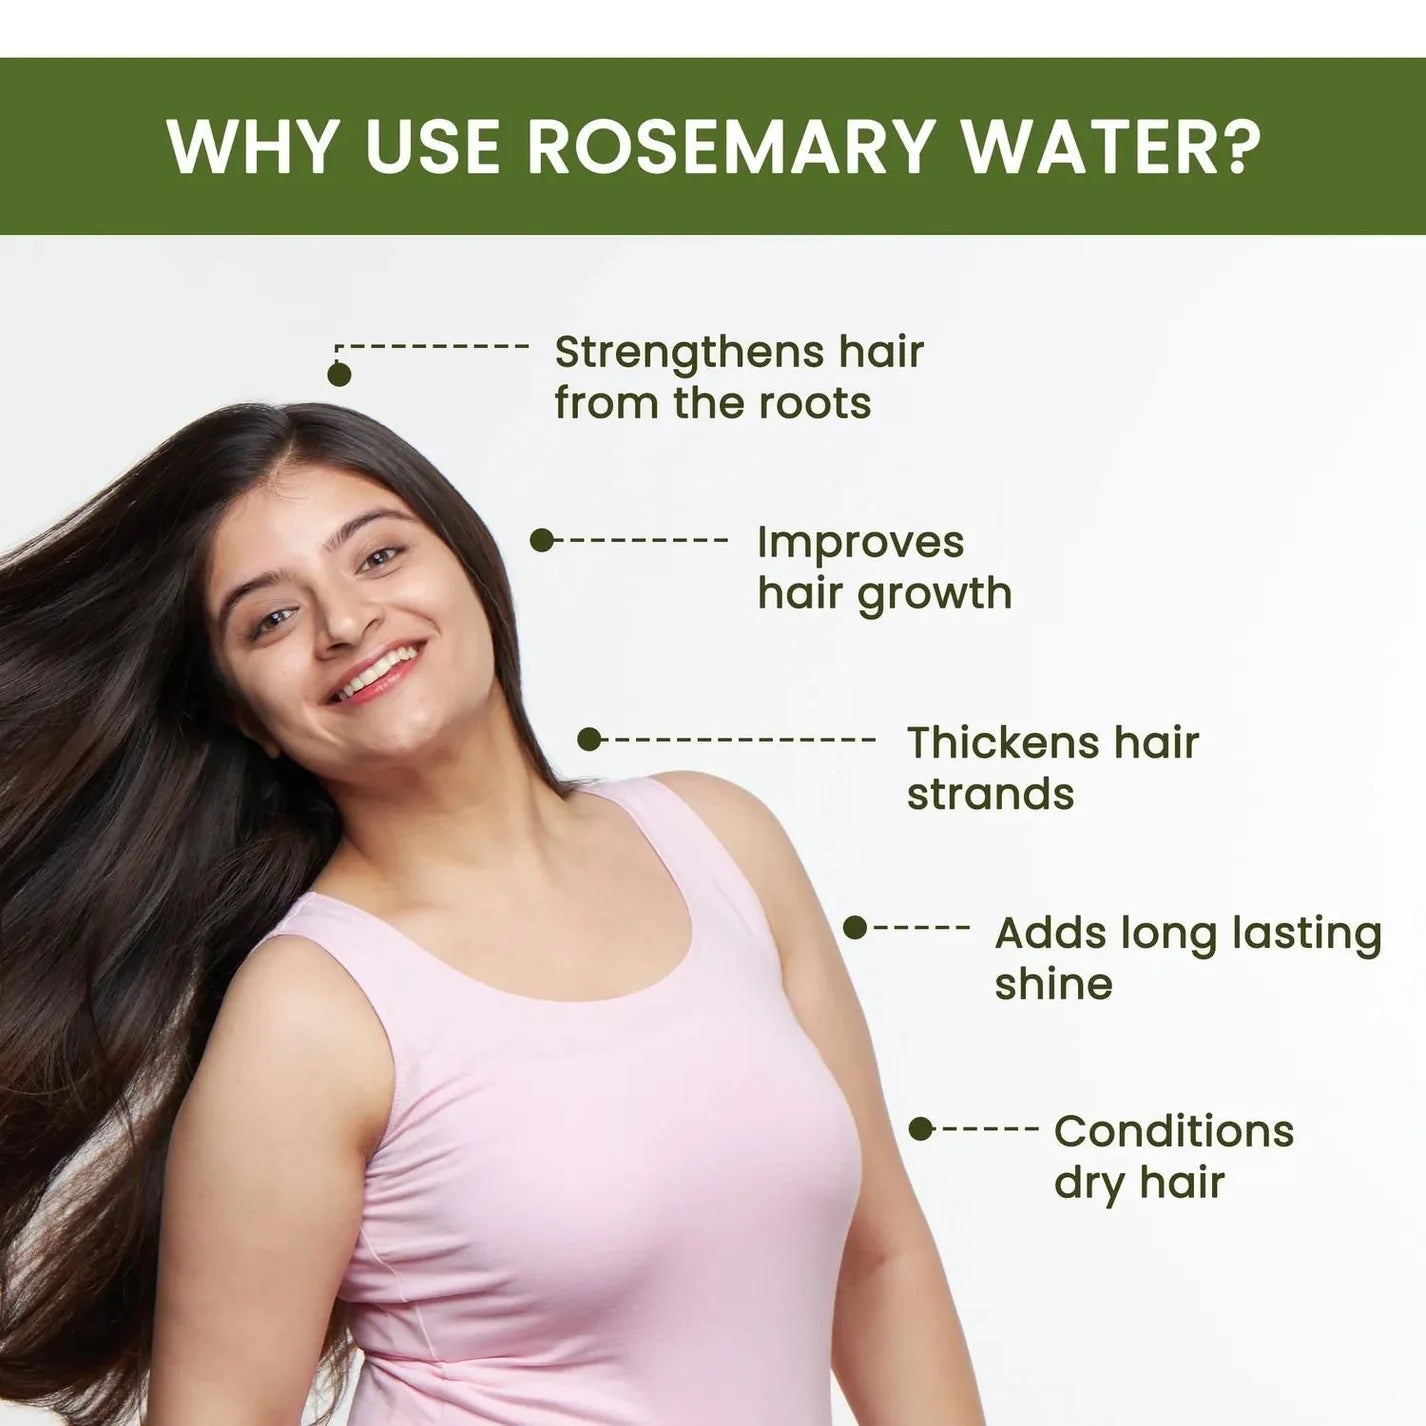 ROSEMARY HAIR SPRAY WATER FOR REGROWTH |(BUY 1 GET 1 FREE)